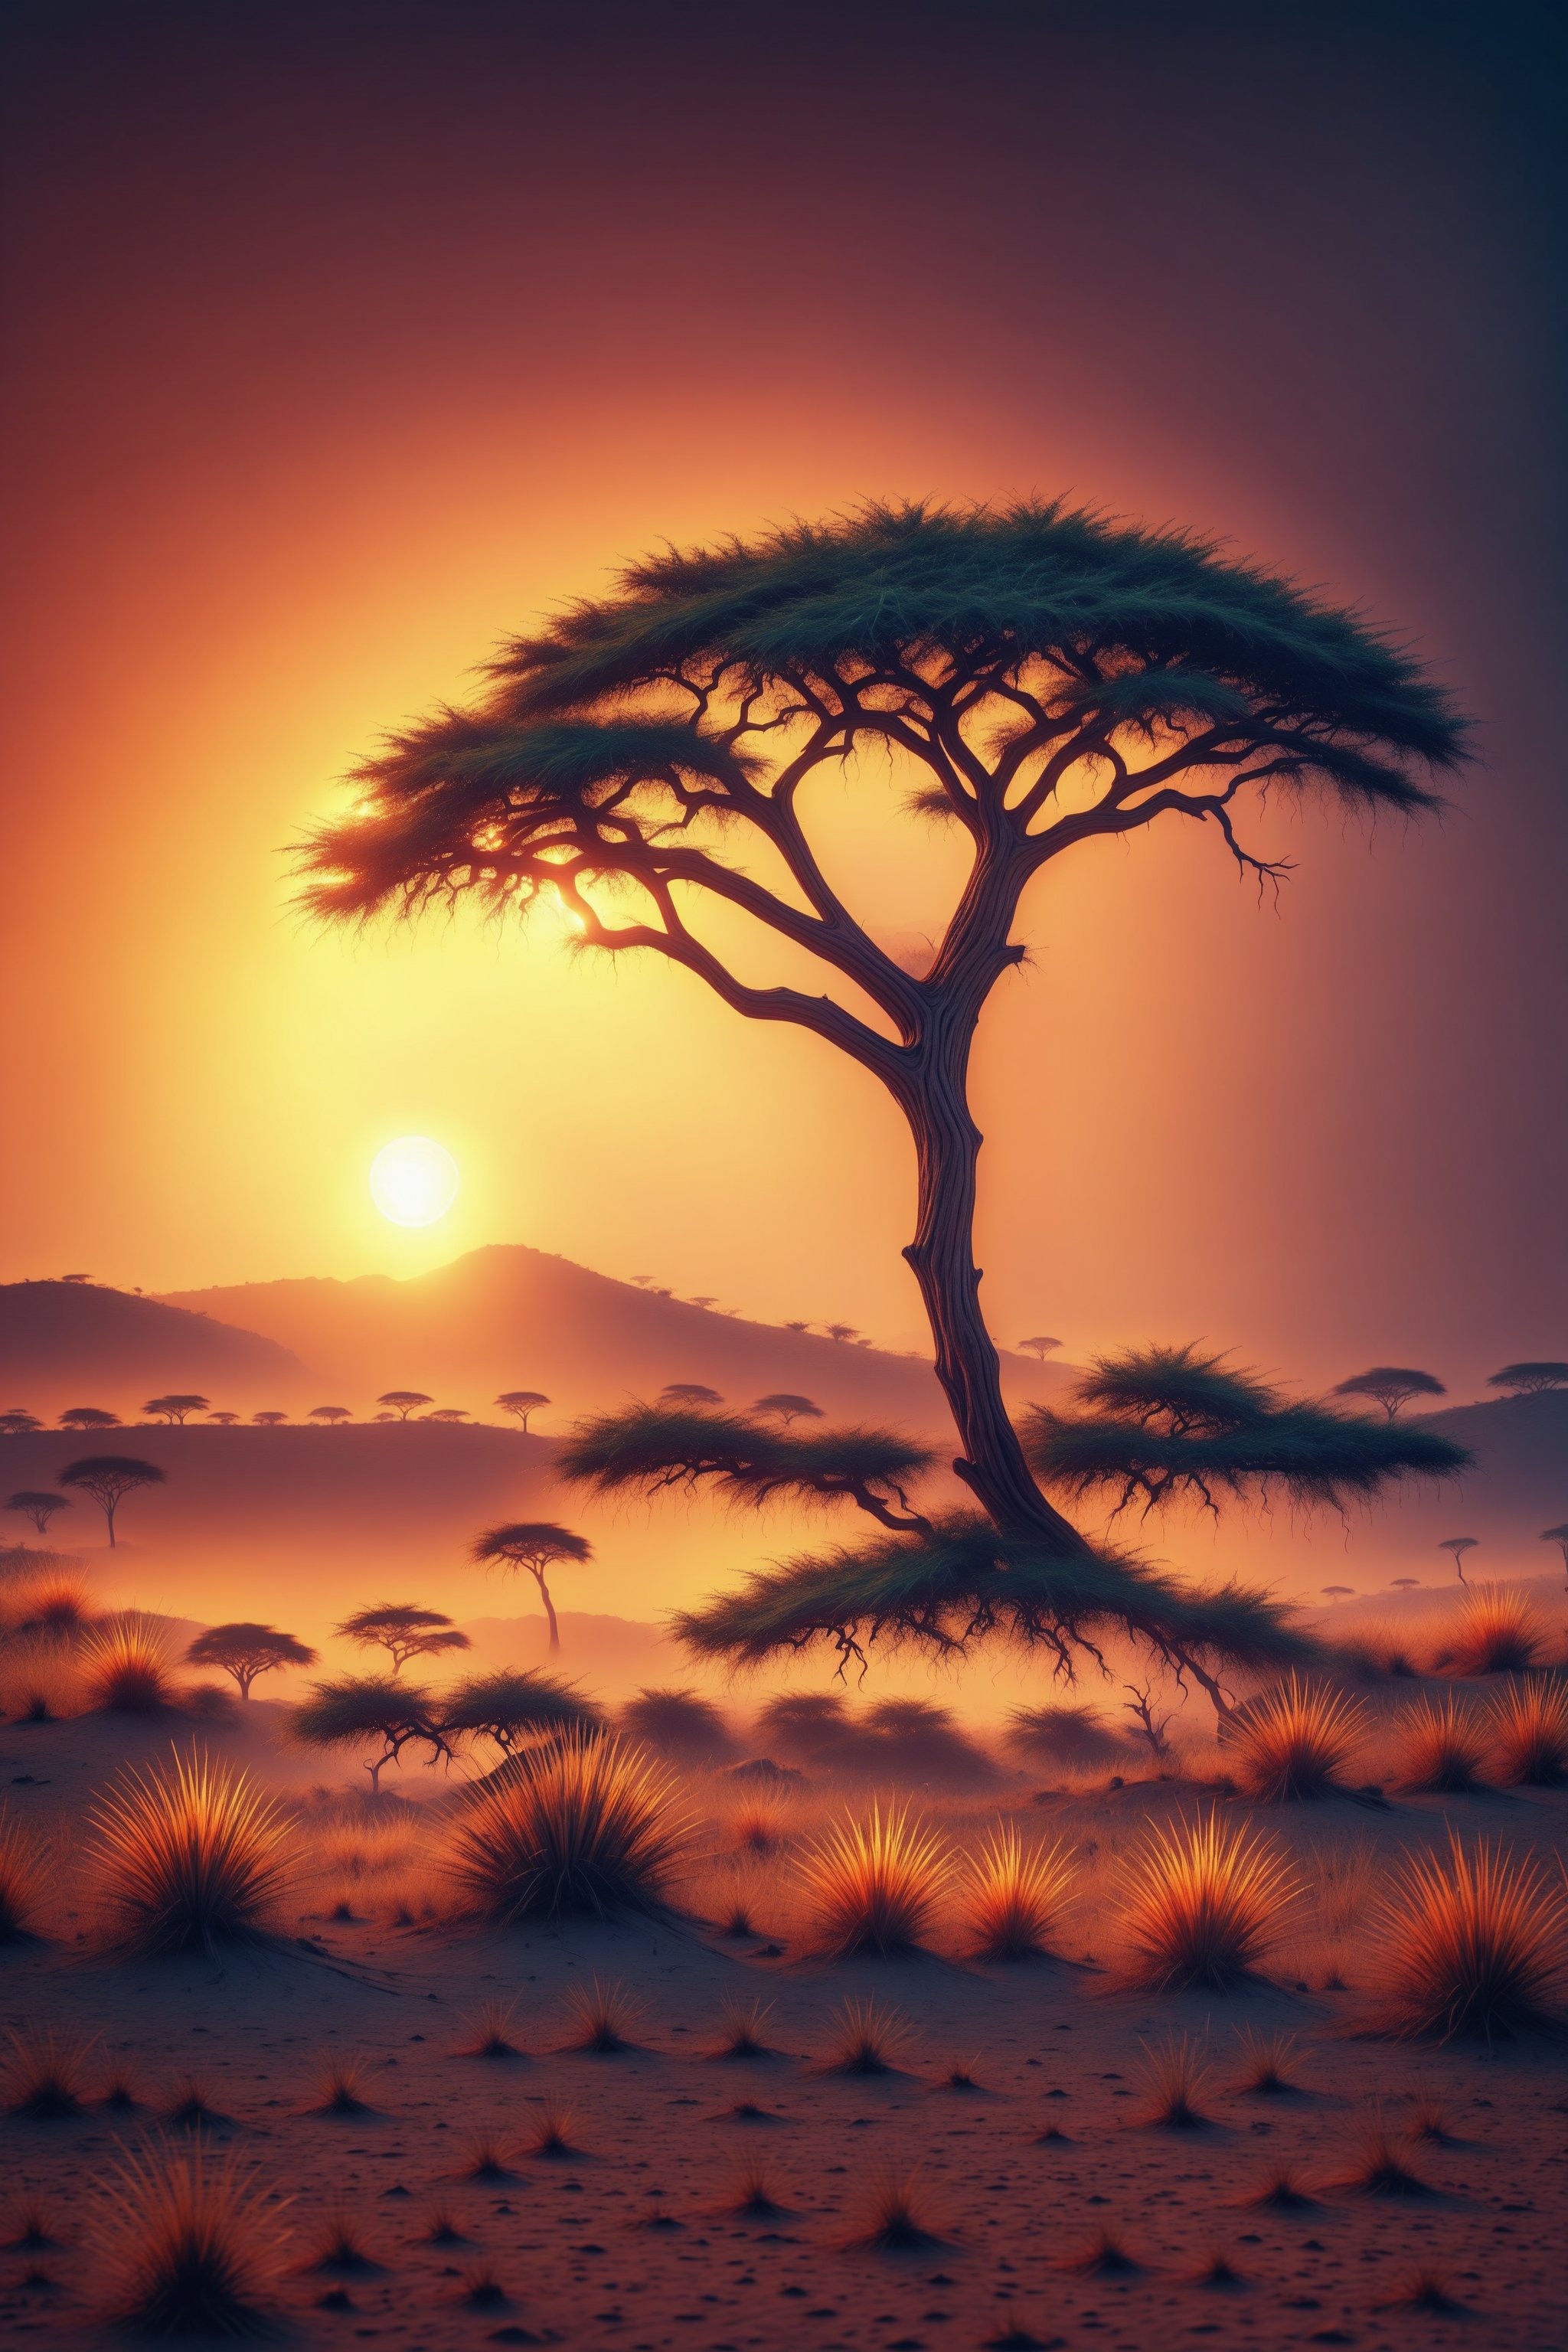 Cool savanna phone wallpapers, HDR, 8k, professional photography